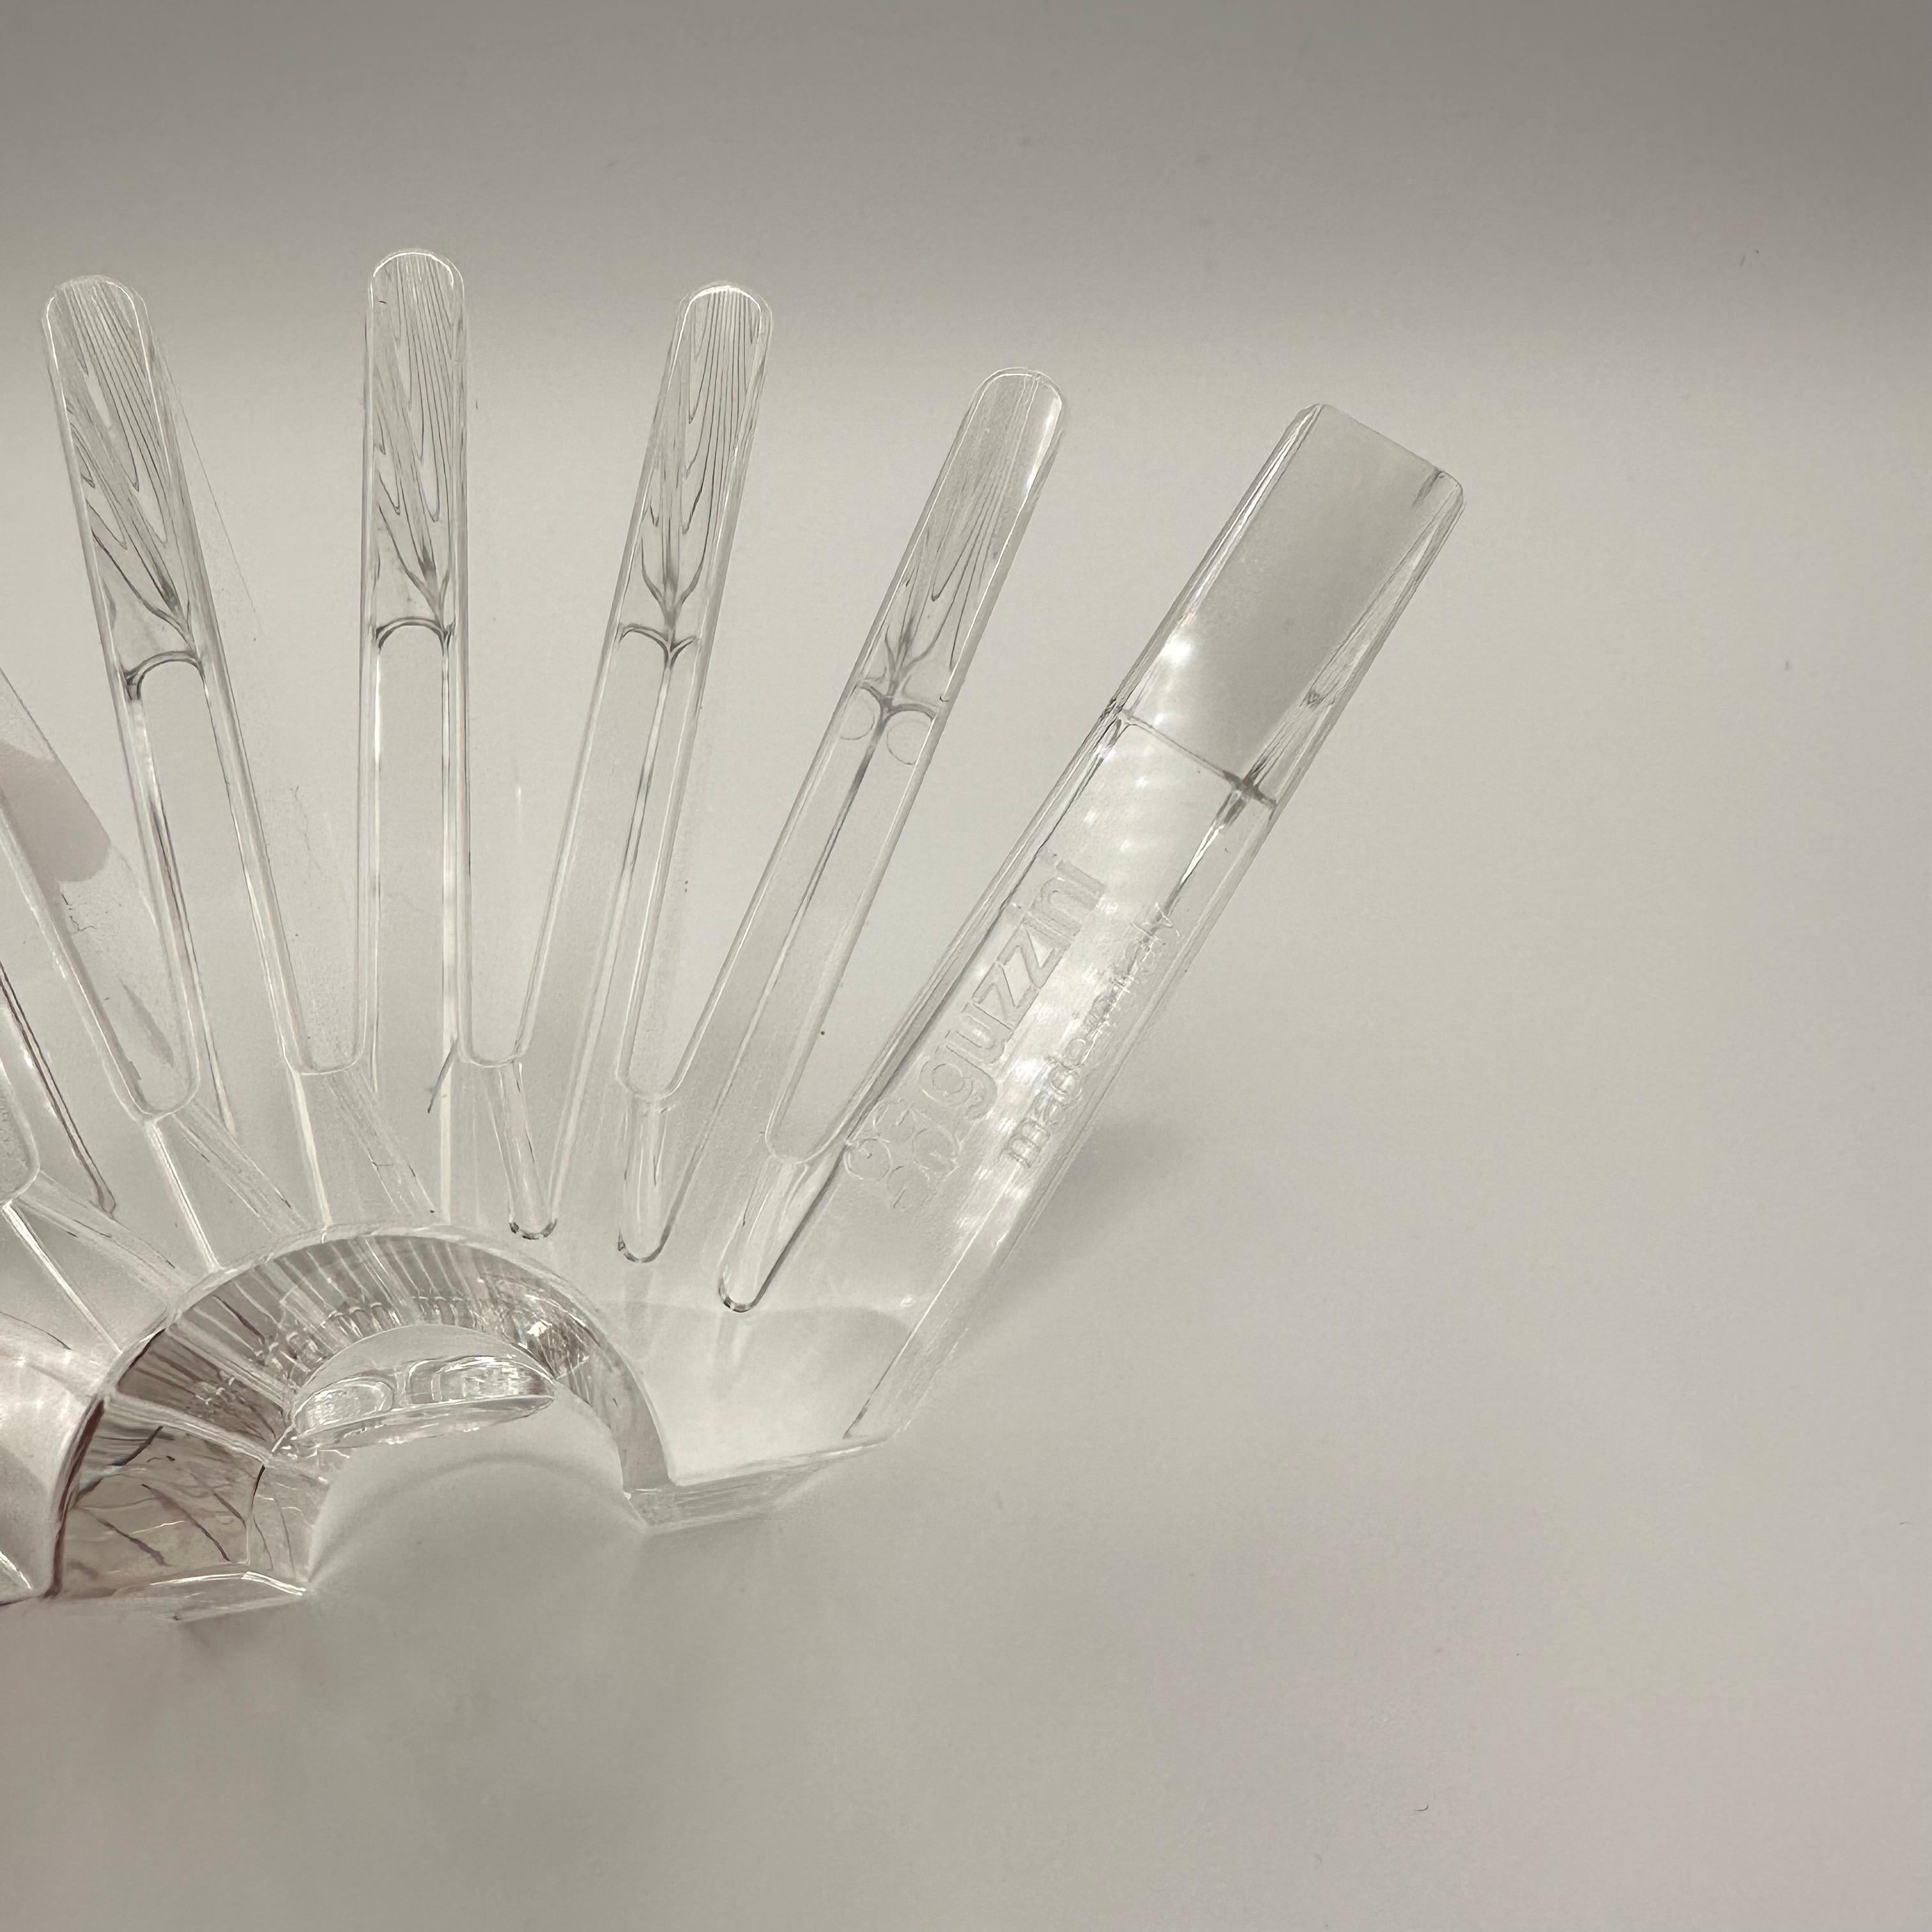 Italian Vintage Clear Lucite Fan Shaped Card Holder by Guzzini 1980s Made in Italy For Sale